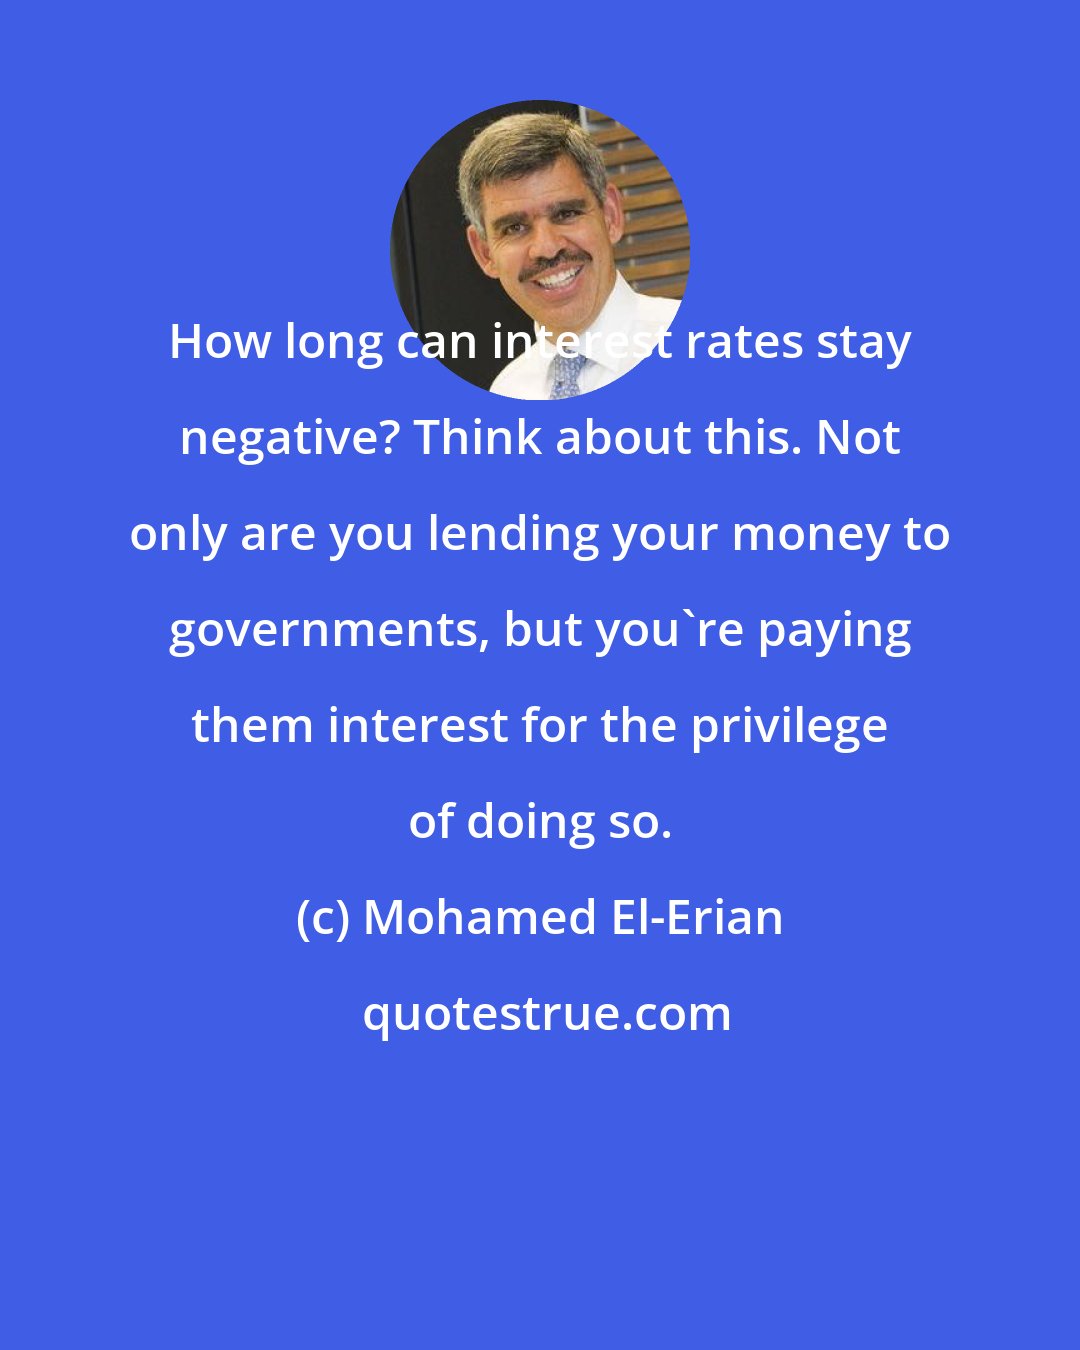 Mohamed El-Erian: How long can interest rates stay negative? Think about this. Not only are you lending your money to governments, but you're paying them interest for the privilege of doing so.